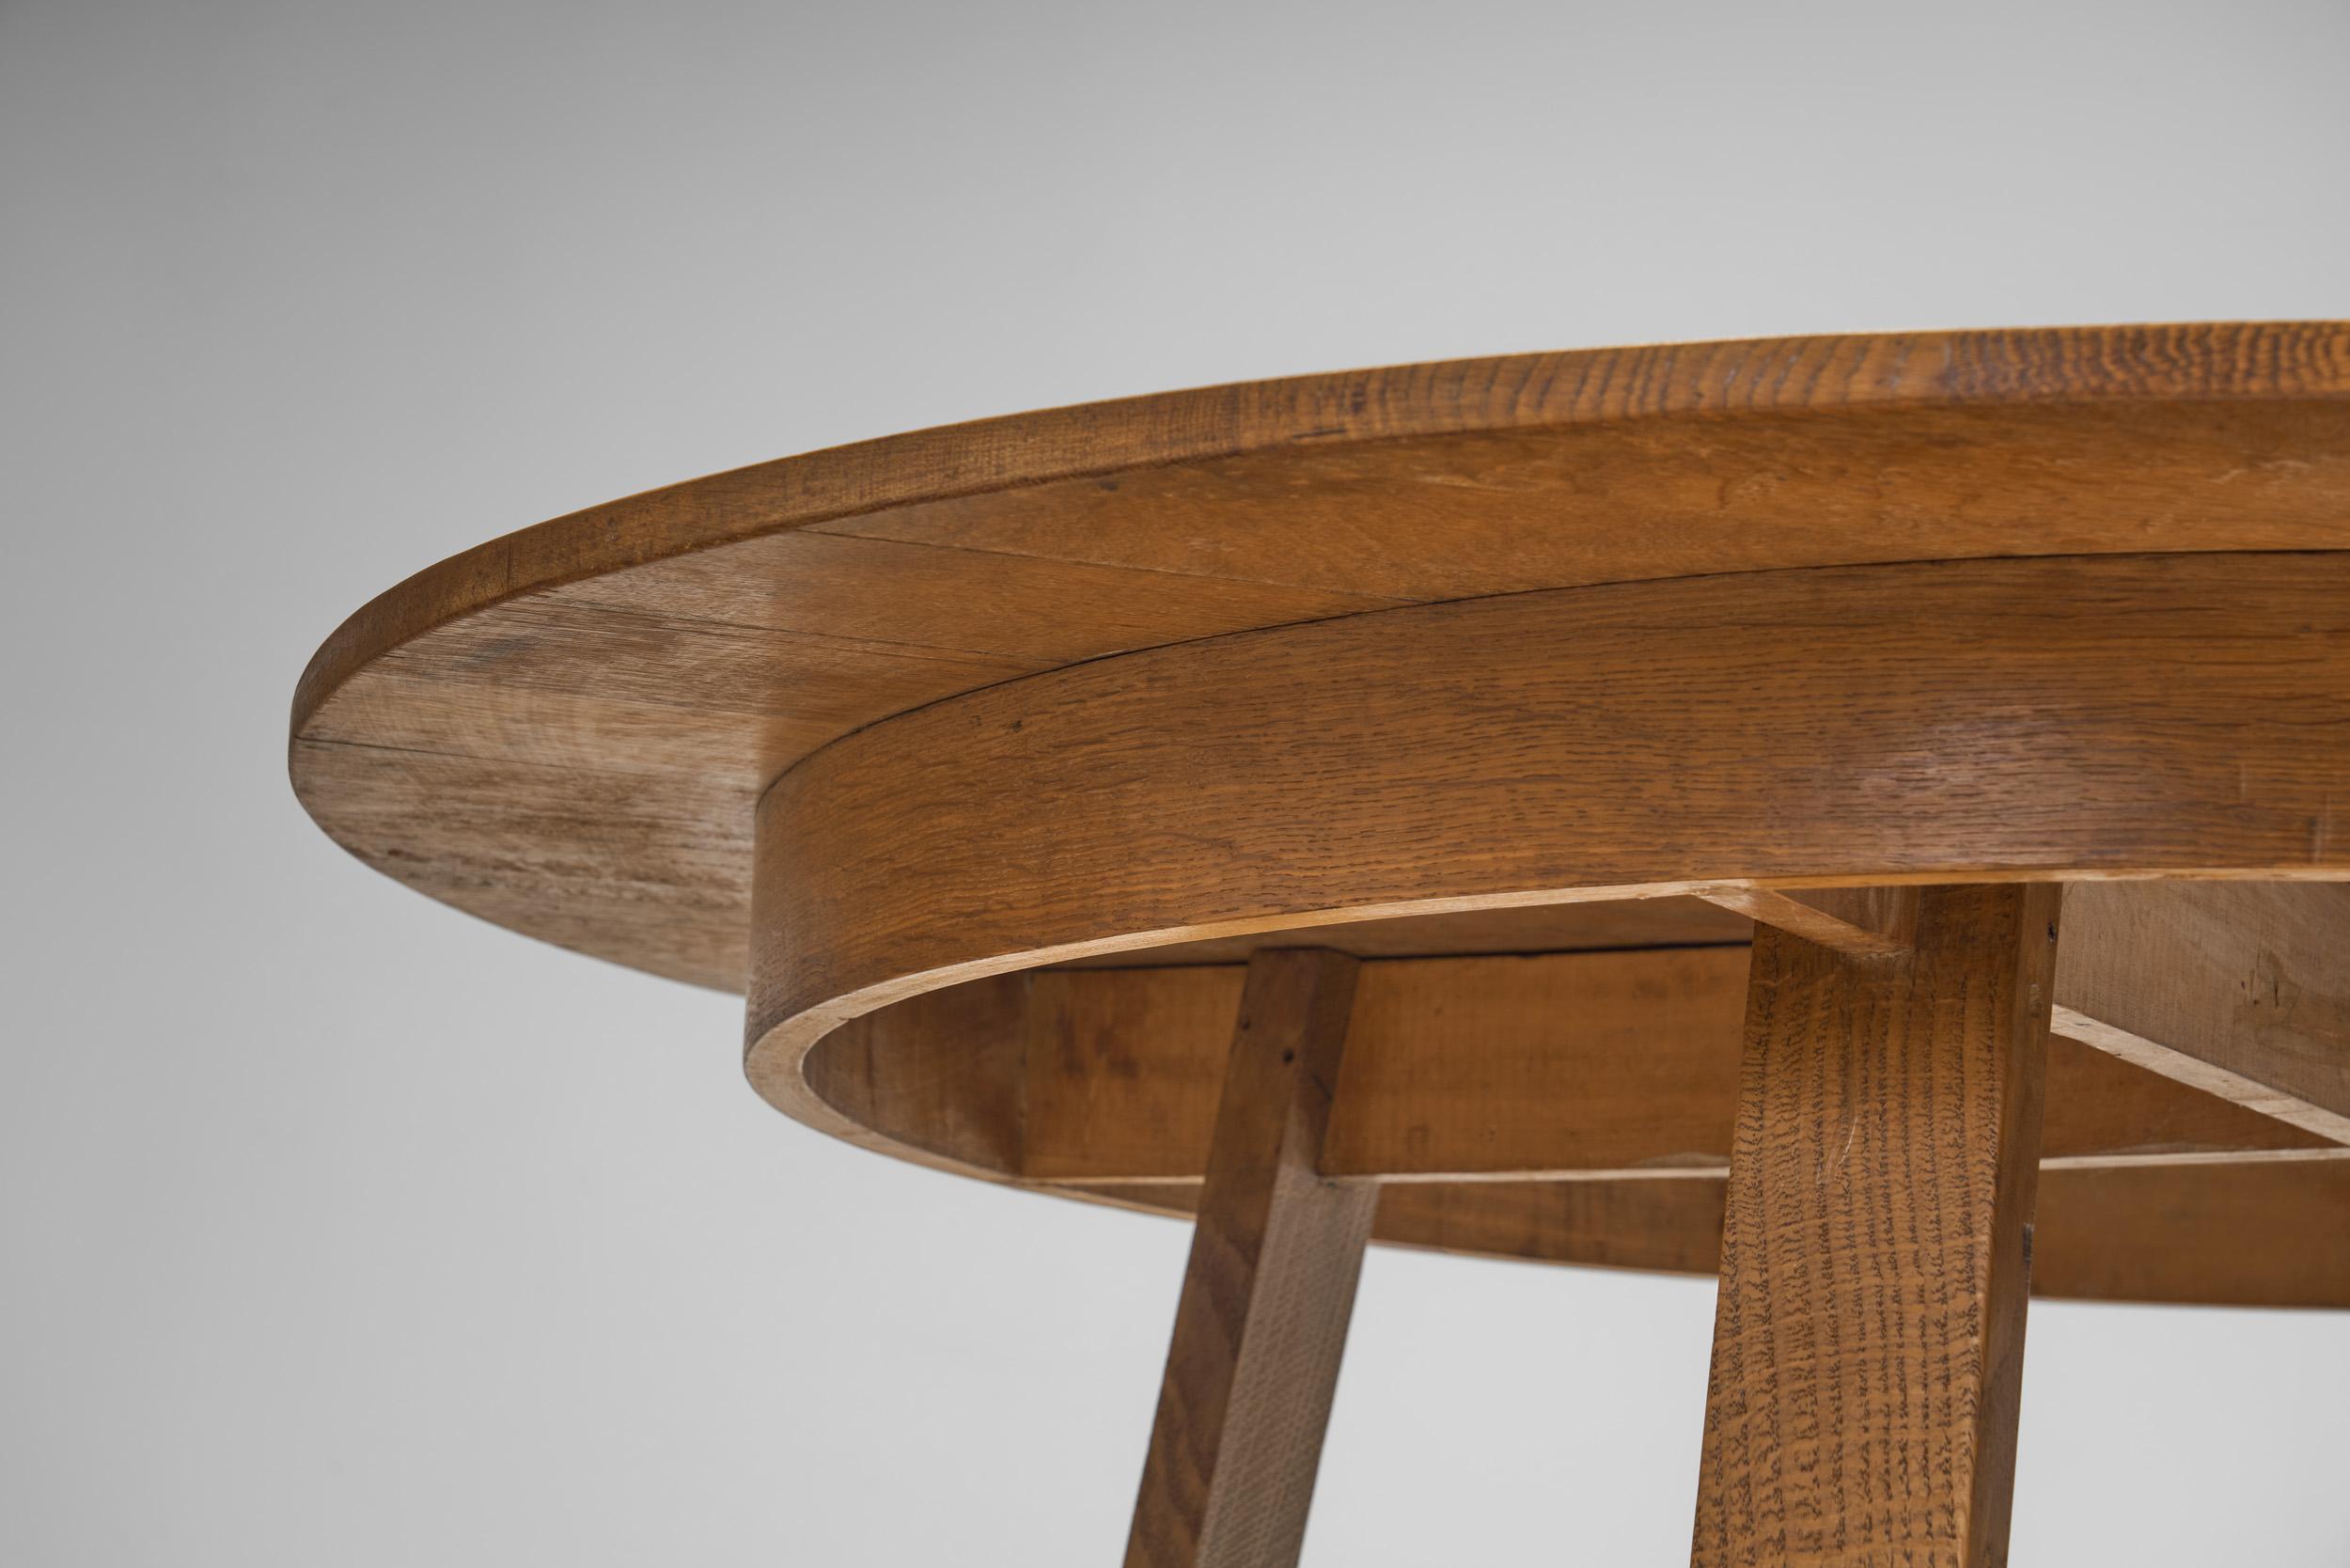 Circular Solid Wood Table with Cross Stretchers, Europe ca 1960s For Sale 1